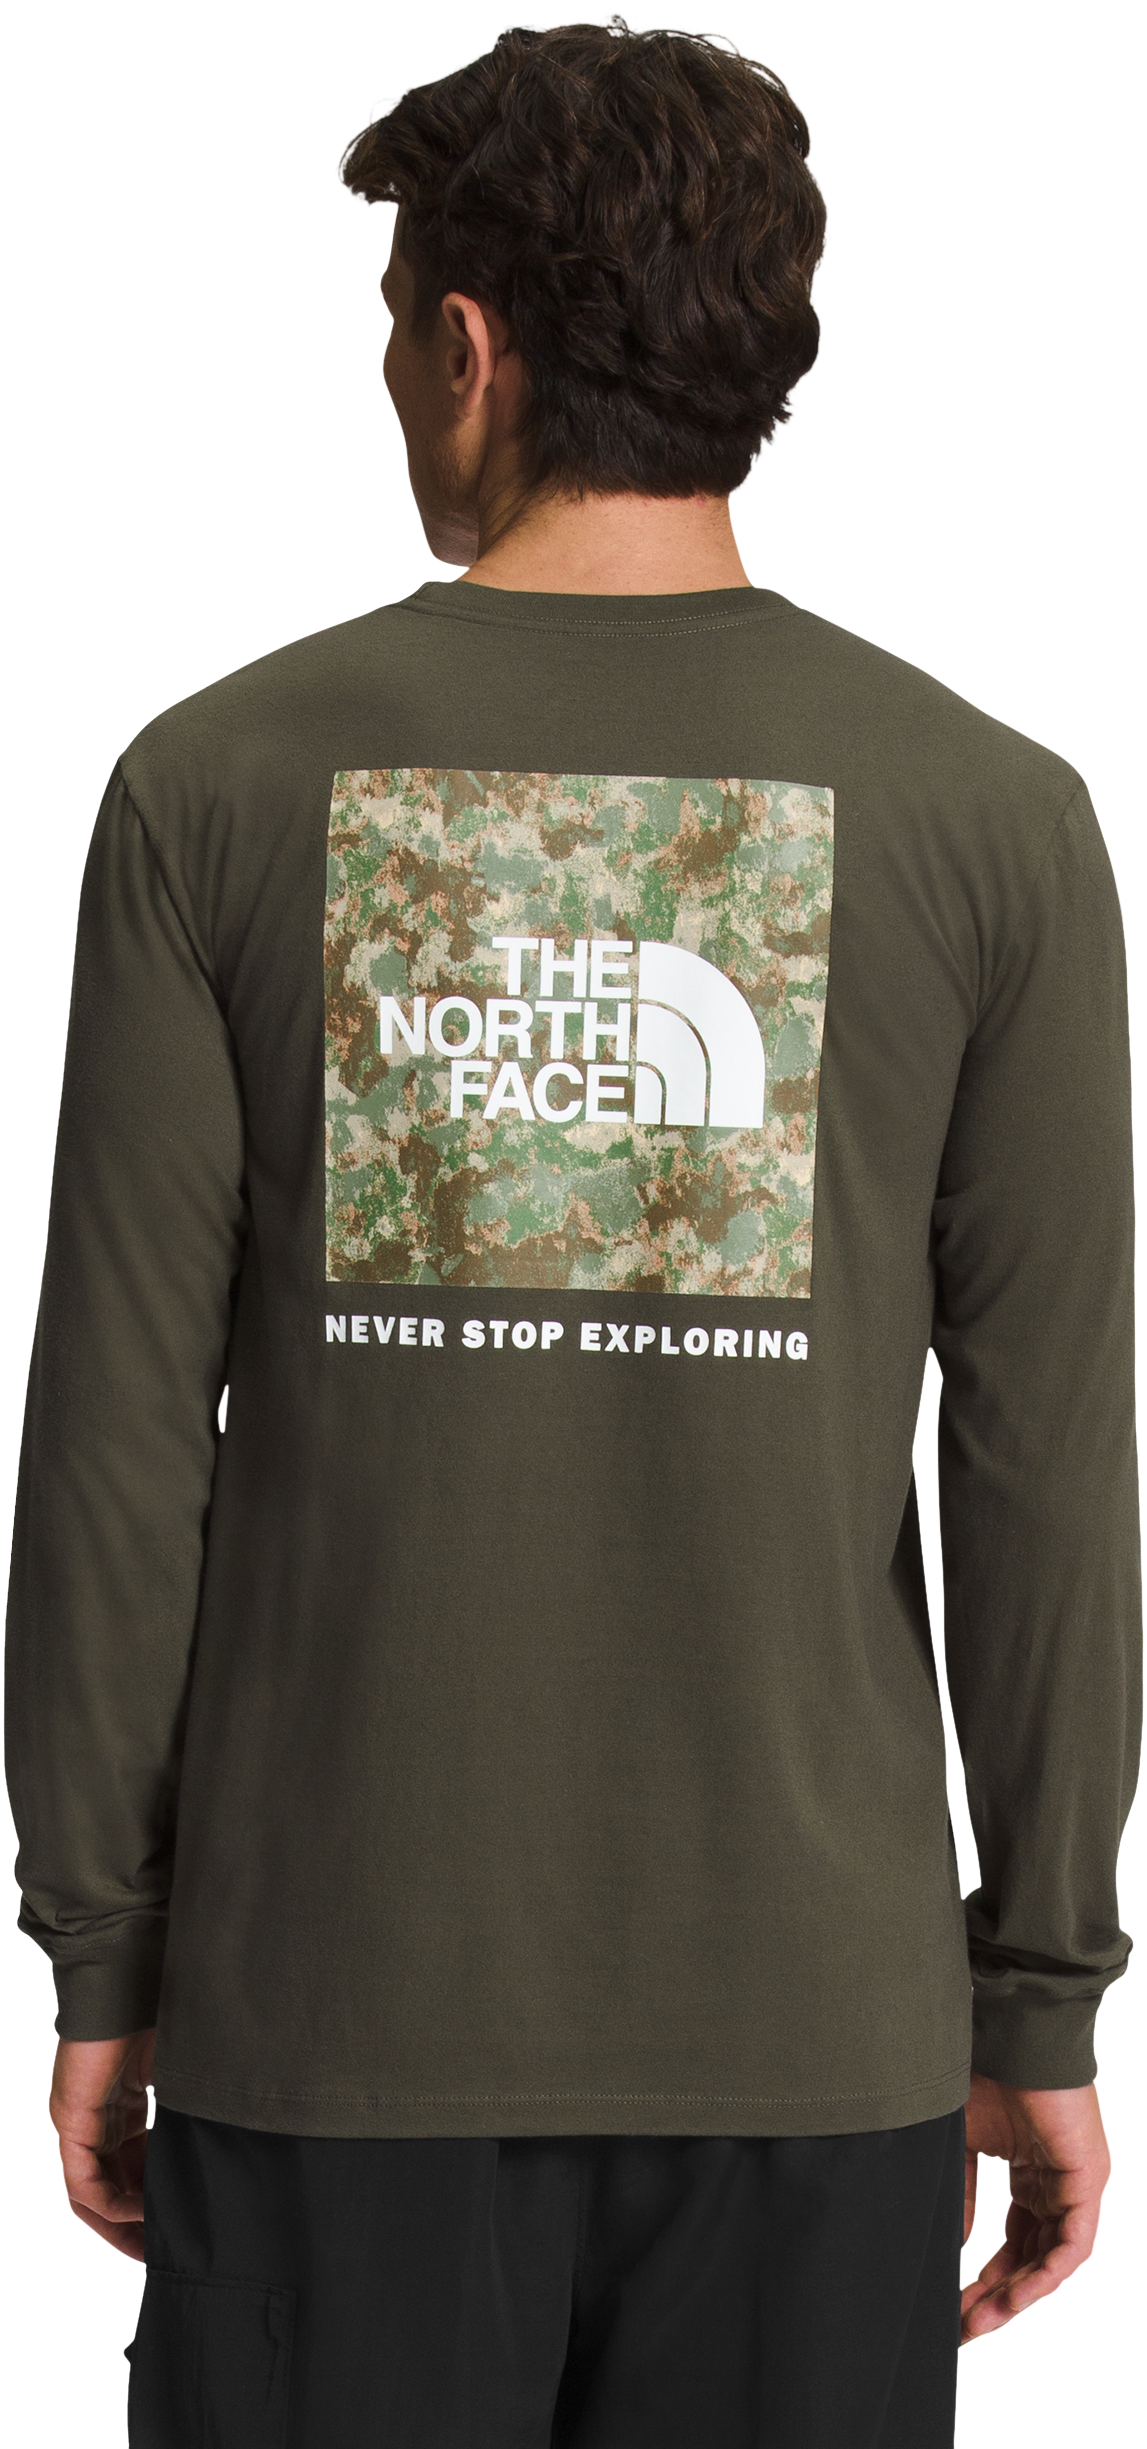 The North Face Box NSE Long-Sleeve Shirt for Men - New Taupe Green/Military Olive - M